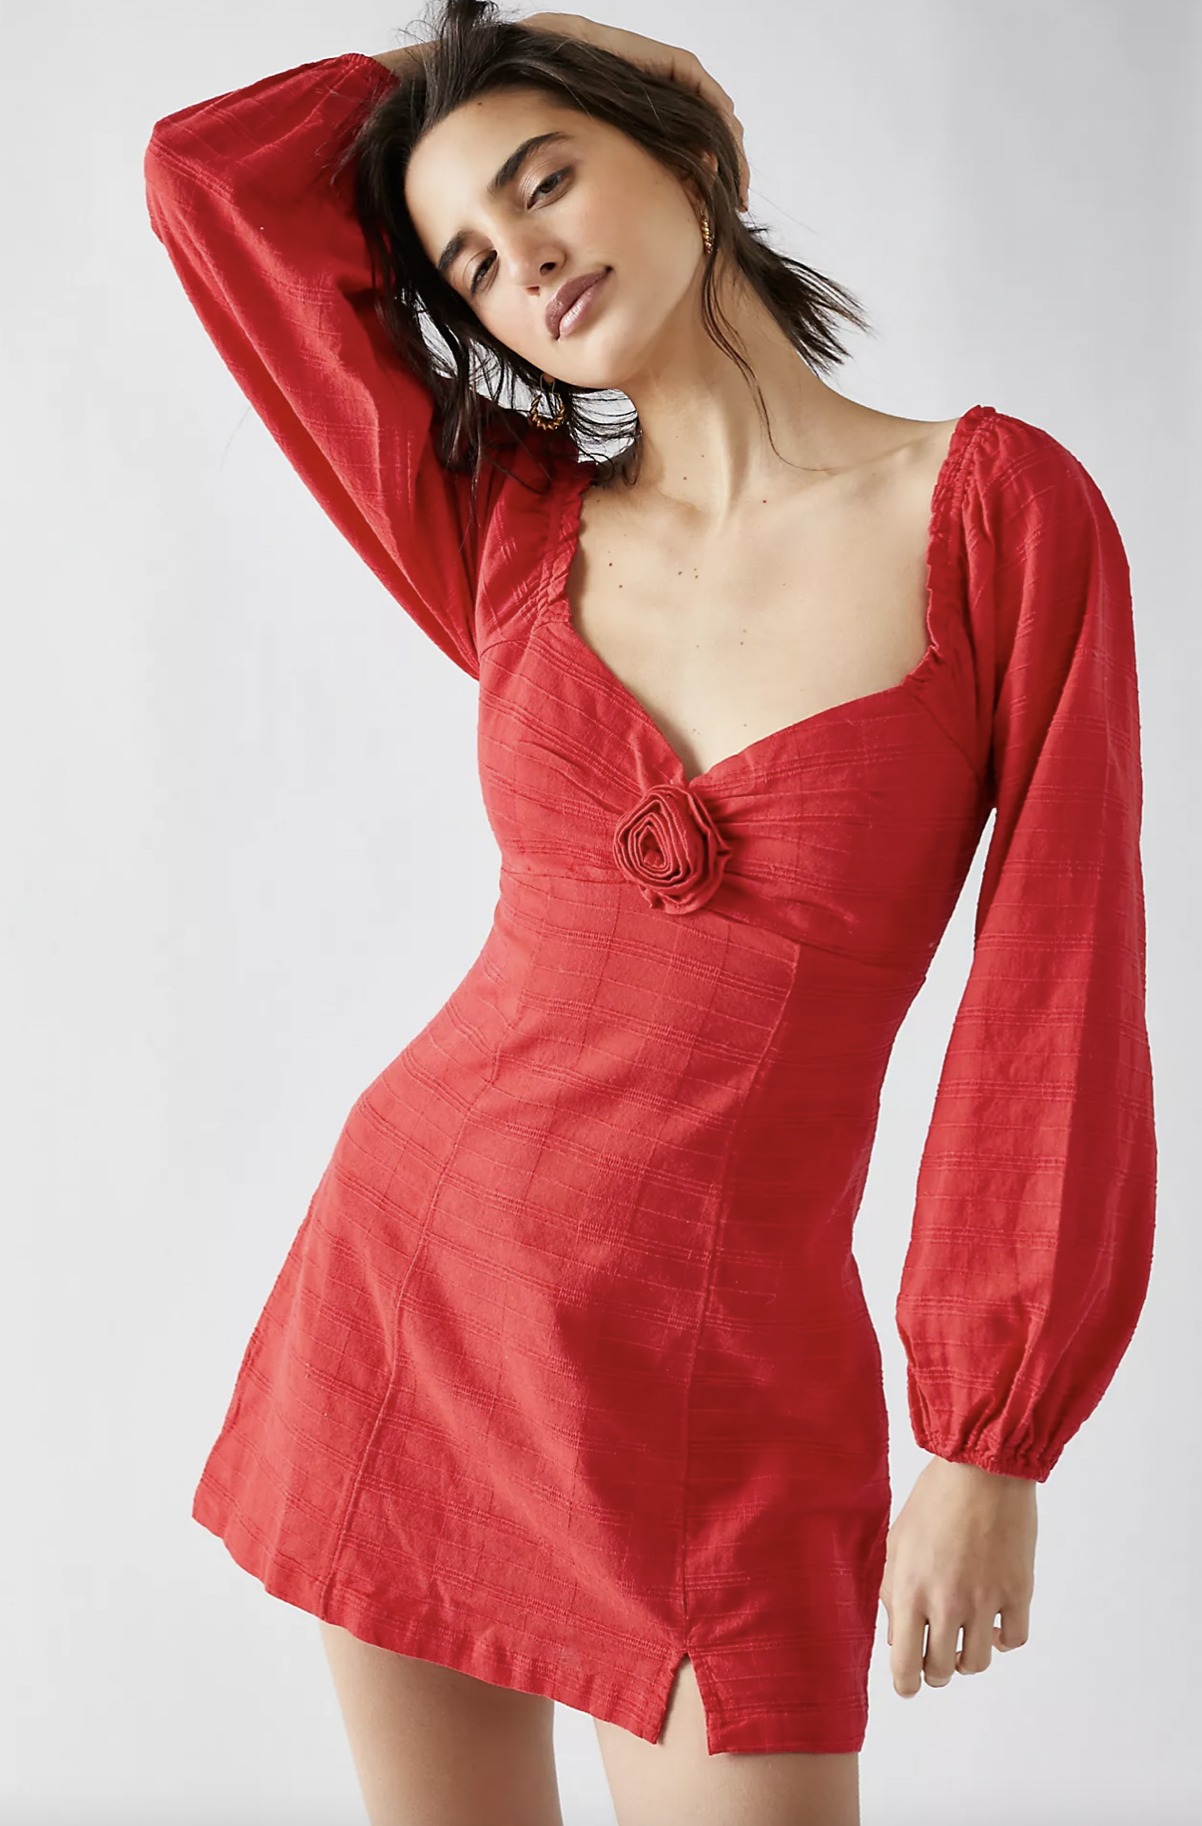 9 Red Valentine's Day Dresses . . . a round-up of my favorites